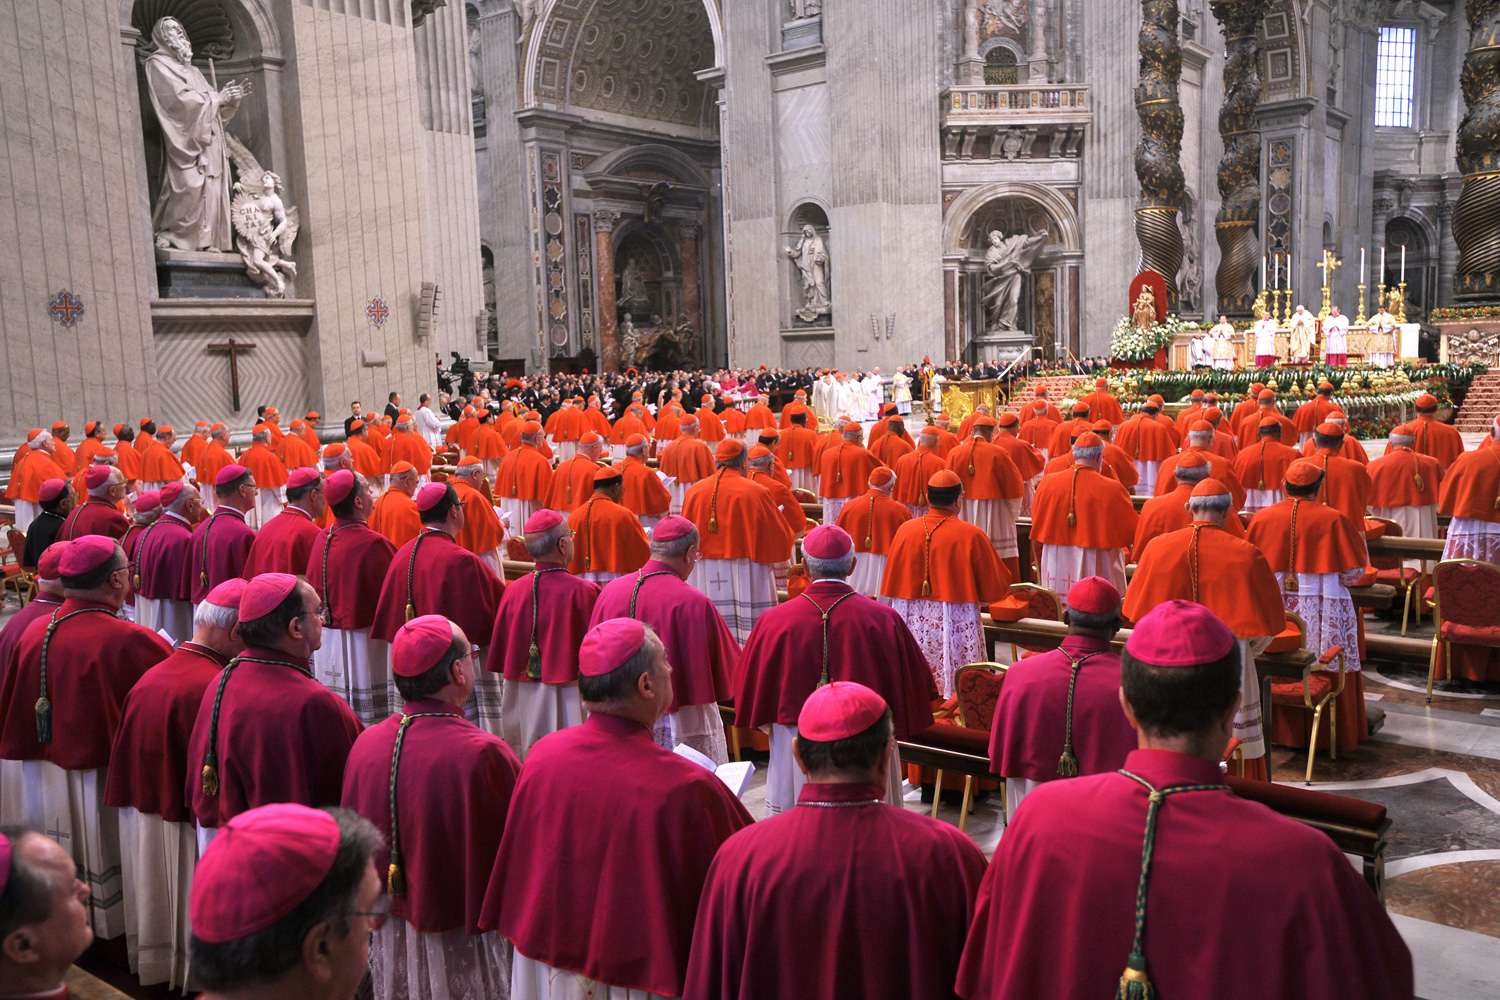 Feb. 19, 2012. Cardinals and Bishops seen during the
                              Concistory ceremony at St. Peter's Basilica in Vatican City.